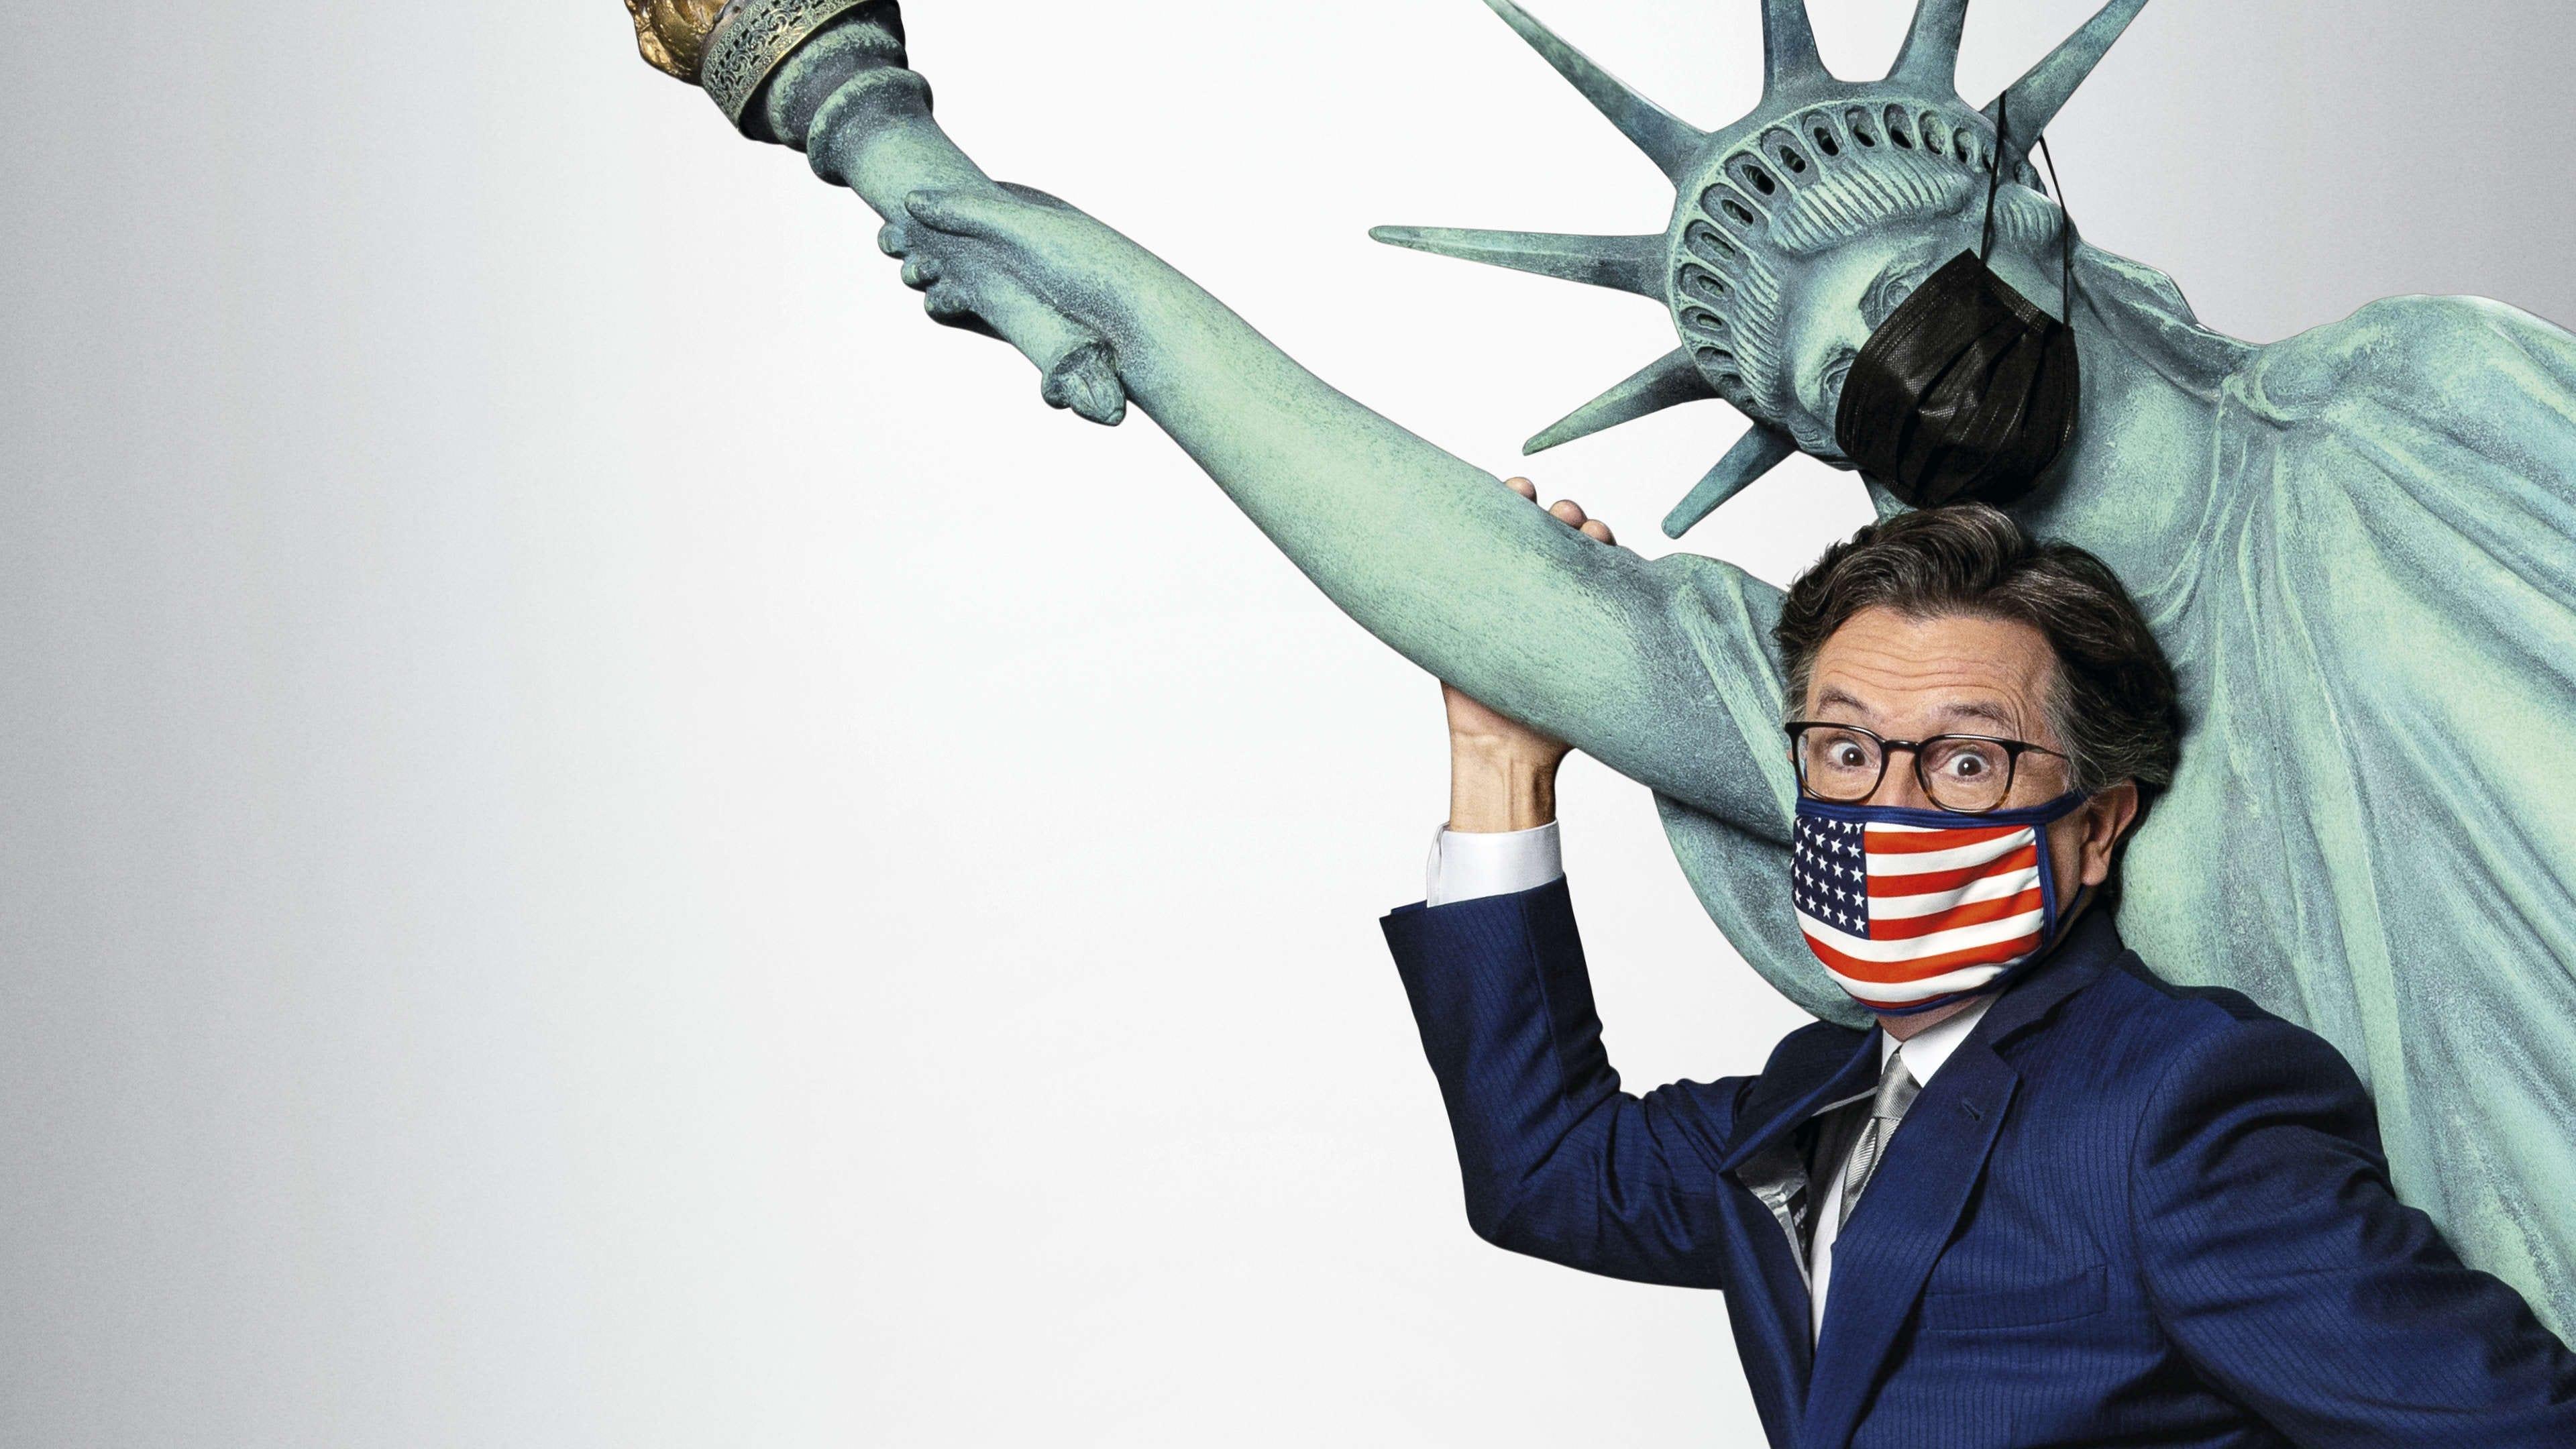 Stephen Colbert's Election Night 2020: Democracy's Last Stand: Building Back America Great Again Better 2020 backdrop